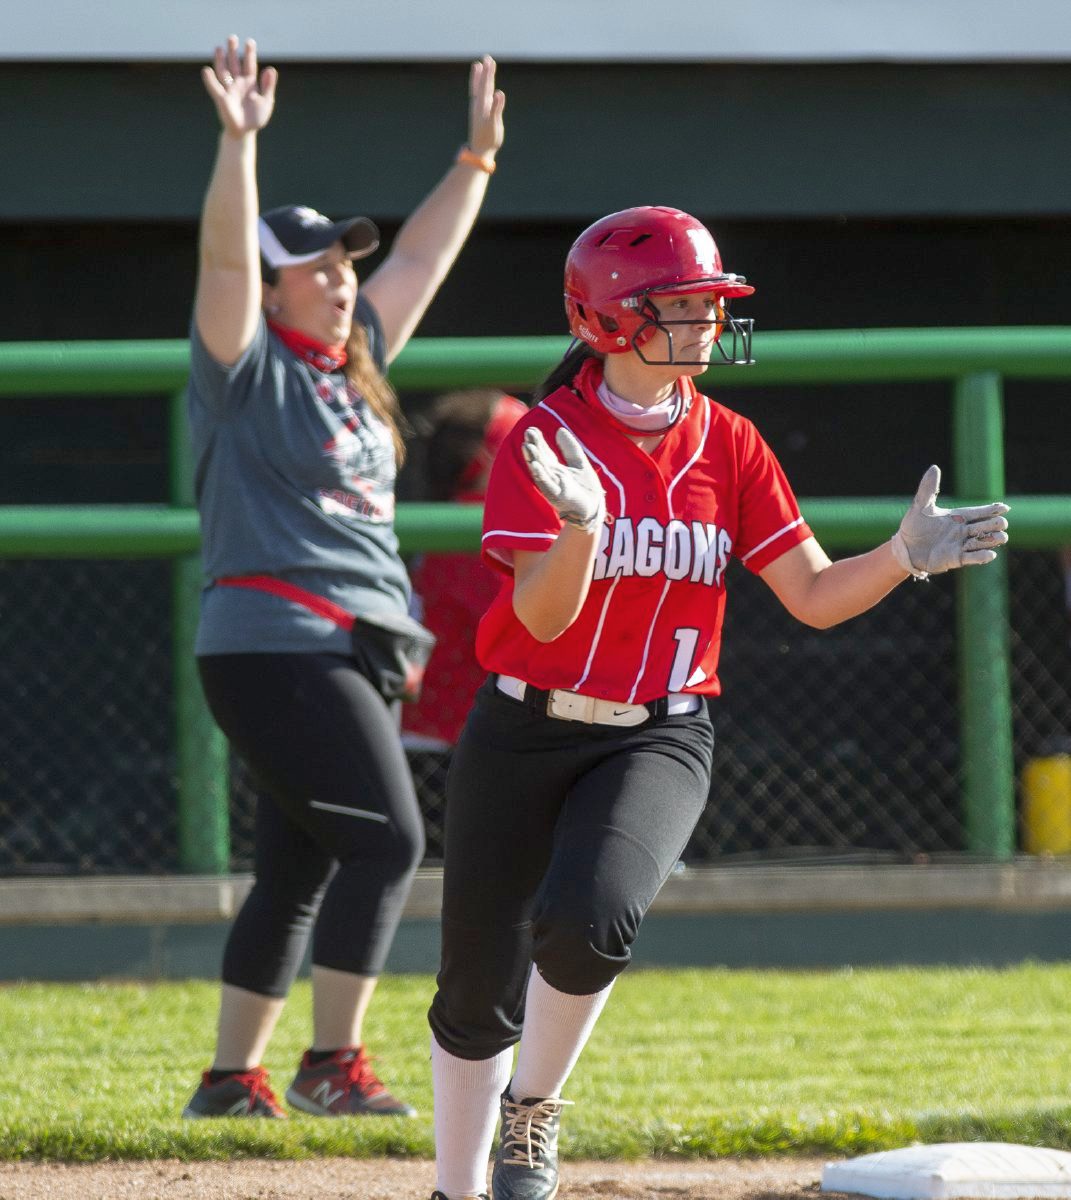 New Palestine’s Lexi Campbell rounds the bases after a home run against Pendleton Heights on Thursday, May 13, 2021. ( Tom Russo | Daily Reporter)